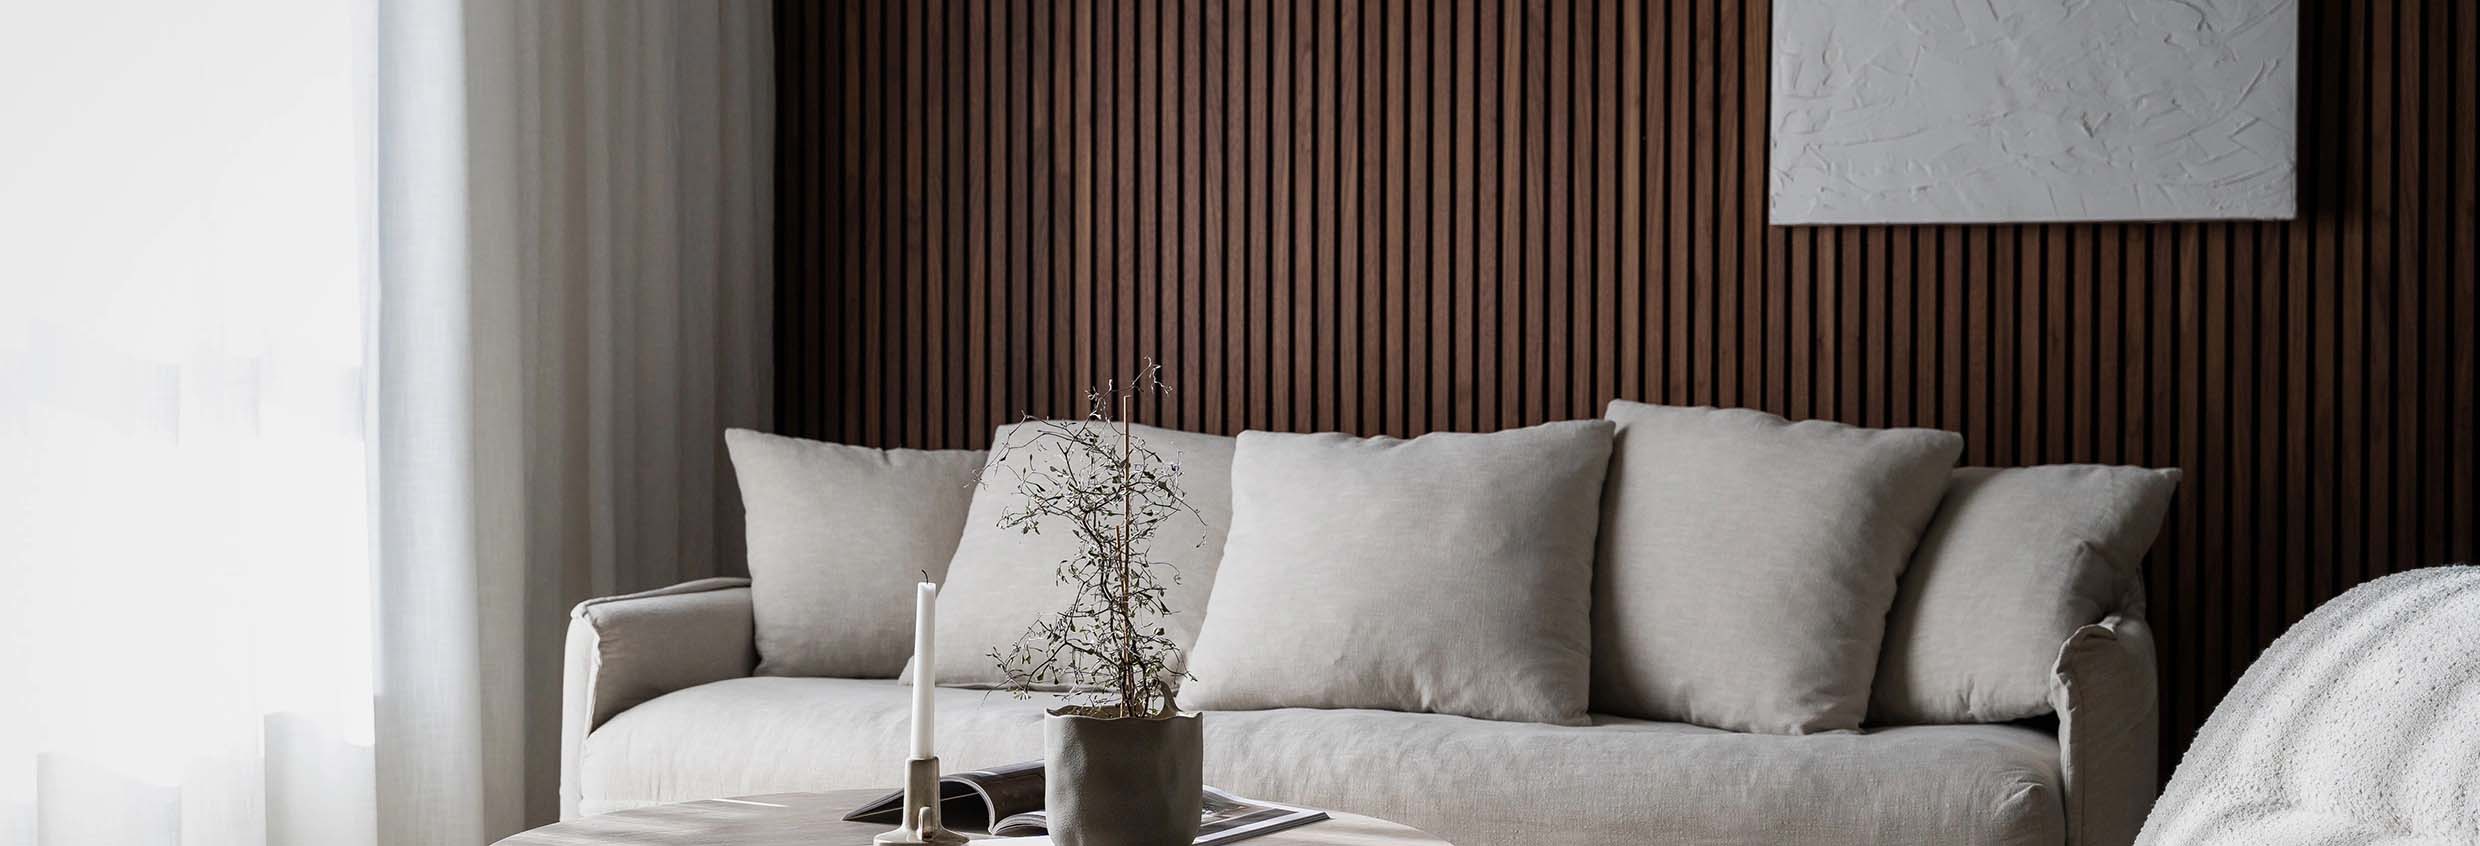 A nordic living room with minimalist decor, featuring a grey sofa against a backdrop of elegant wood slat wall panels and a white abstract art piece.